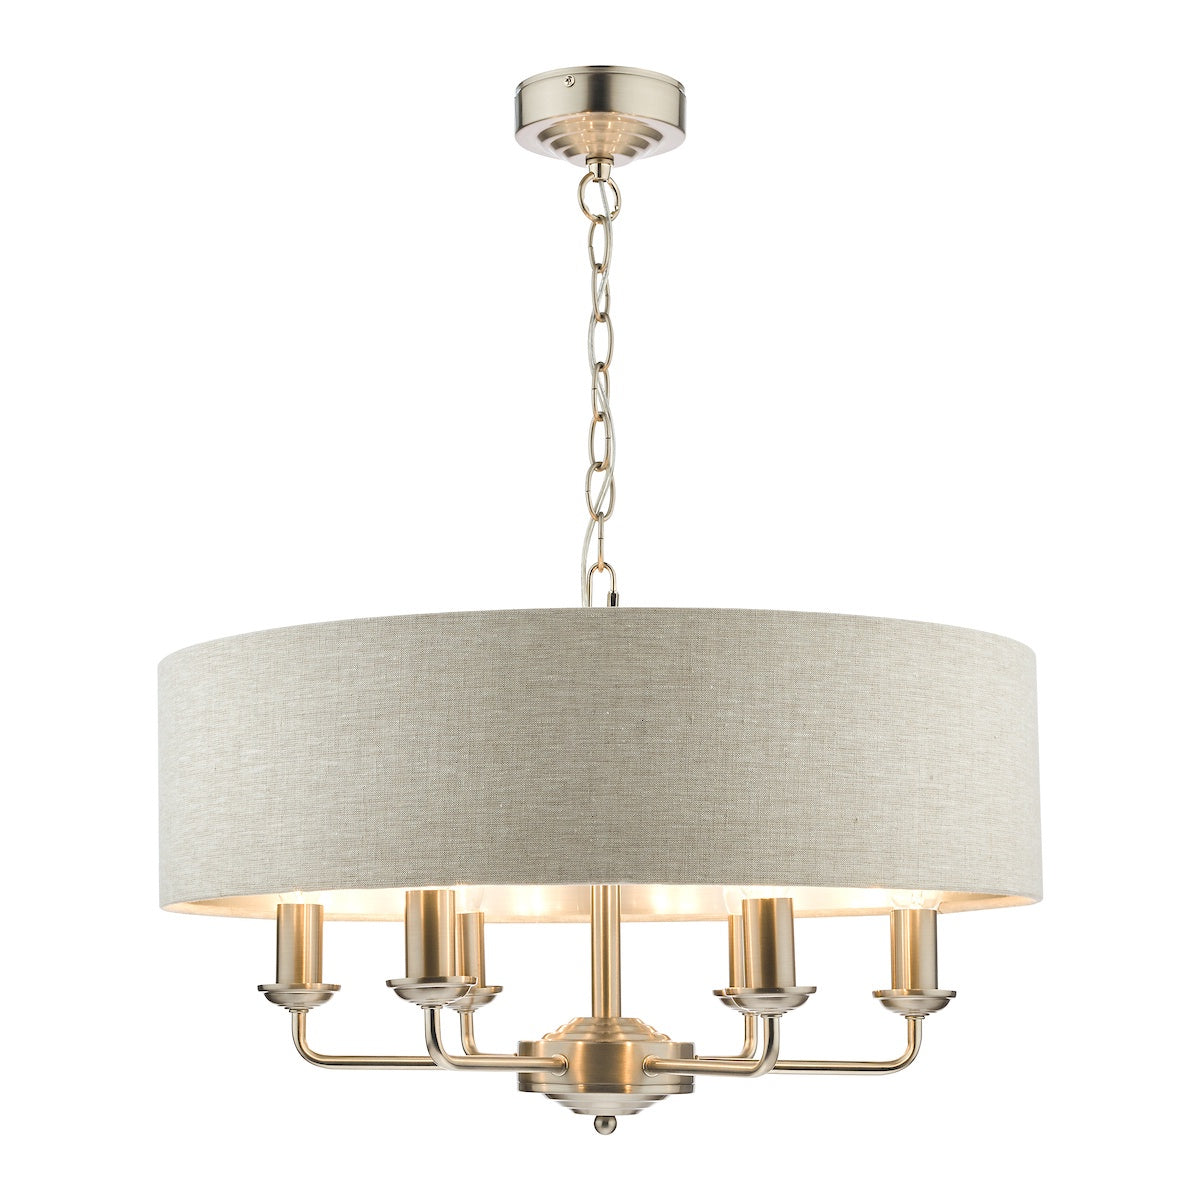 Laura Ashley Sorrento Brushed Chrome 6 Light Armed LA3518806-Qd Fitting Ceiling Light with Natural Shade